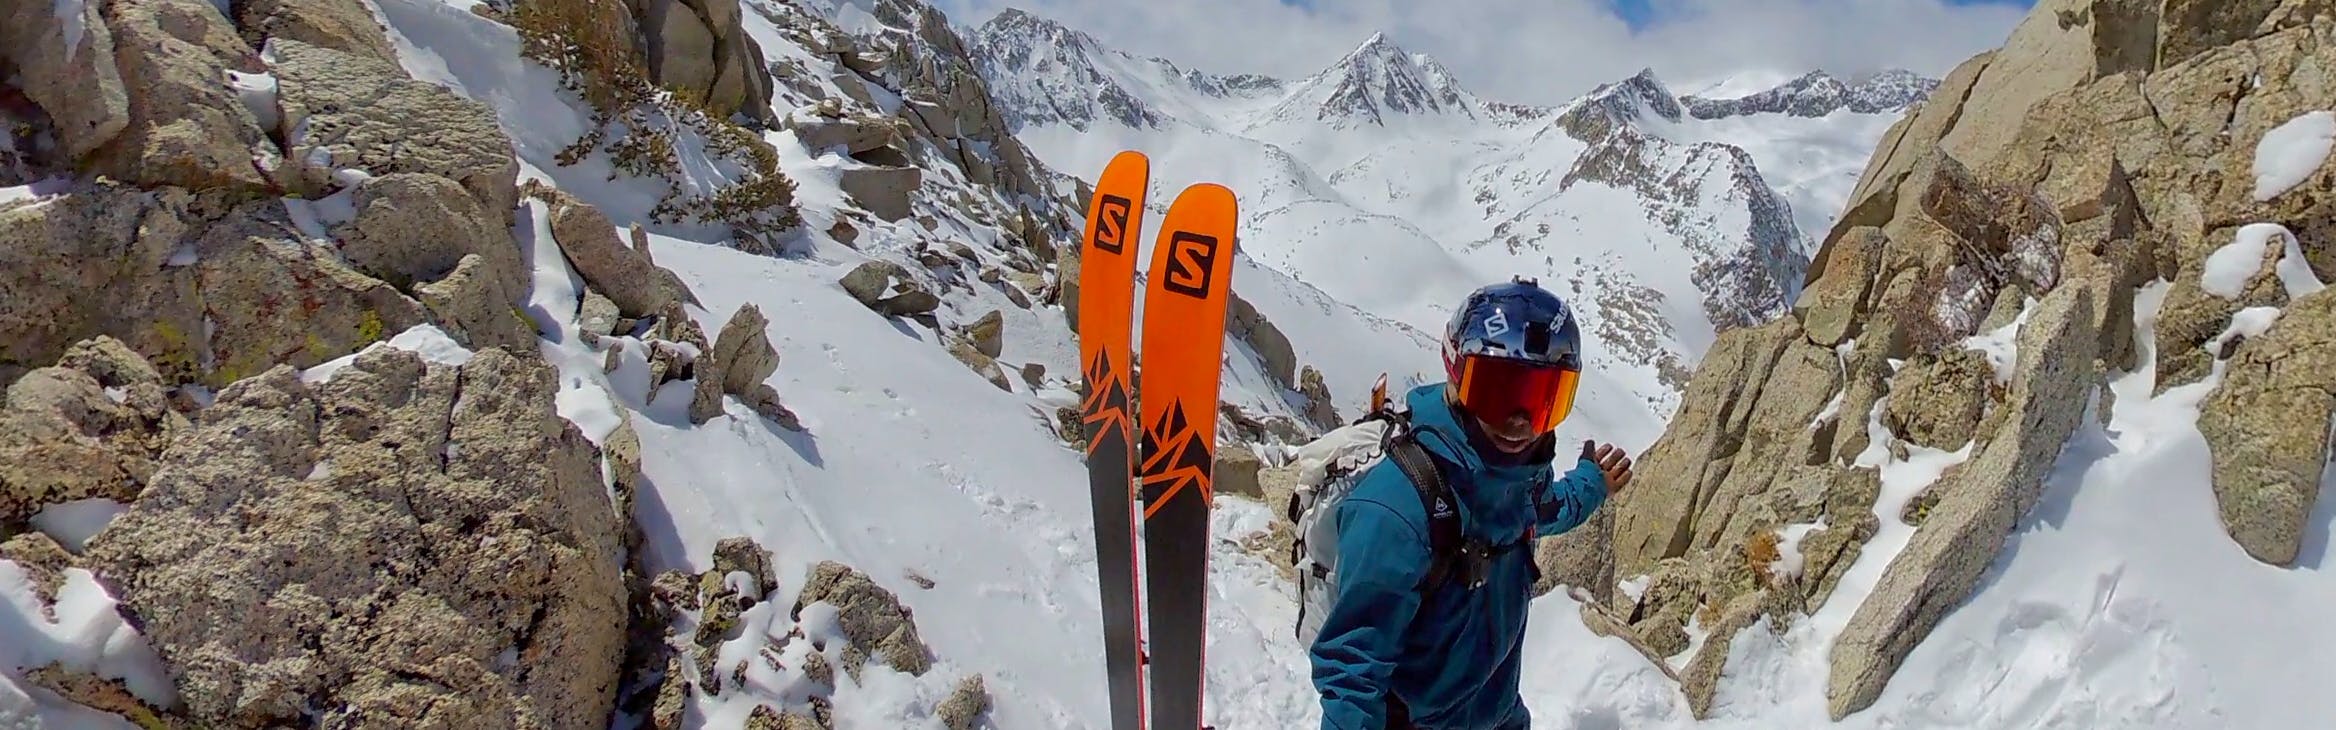 Josh takes a selfie on the mountain while wearing a google and a helmet. His Salomon skis are propped up next to him.